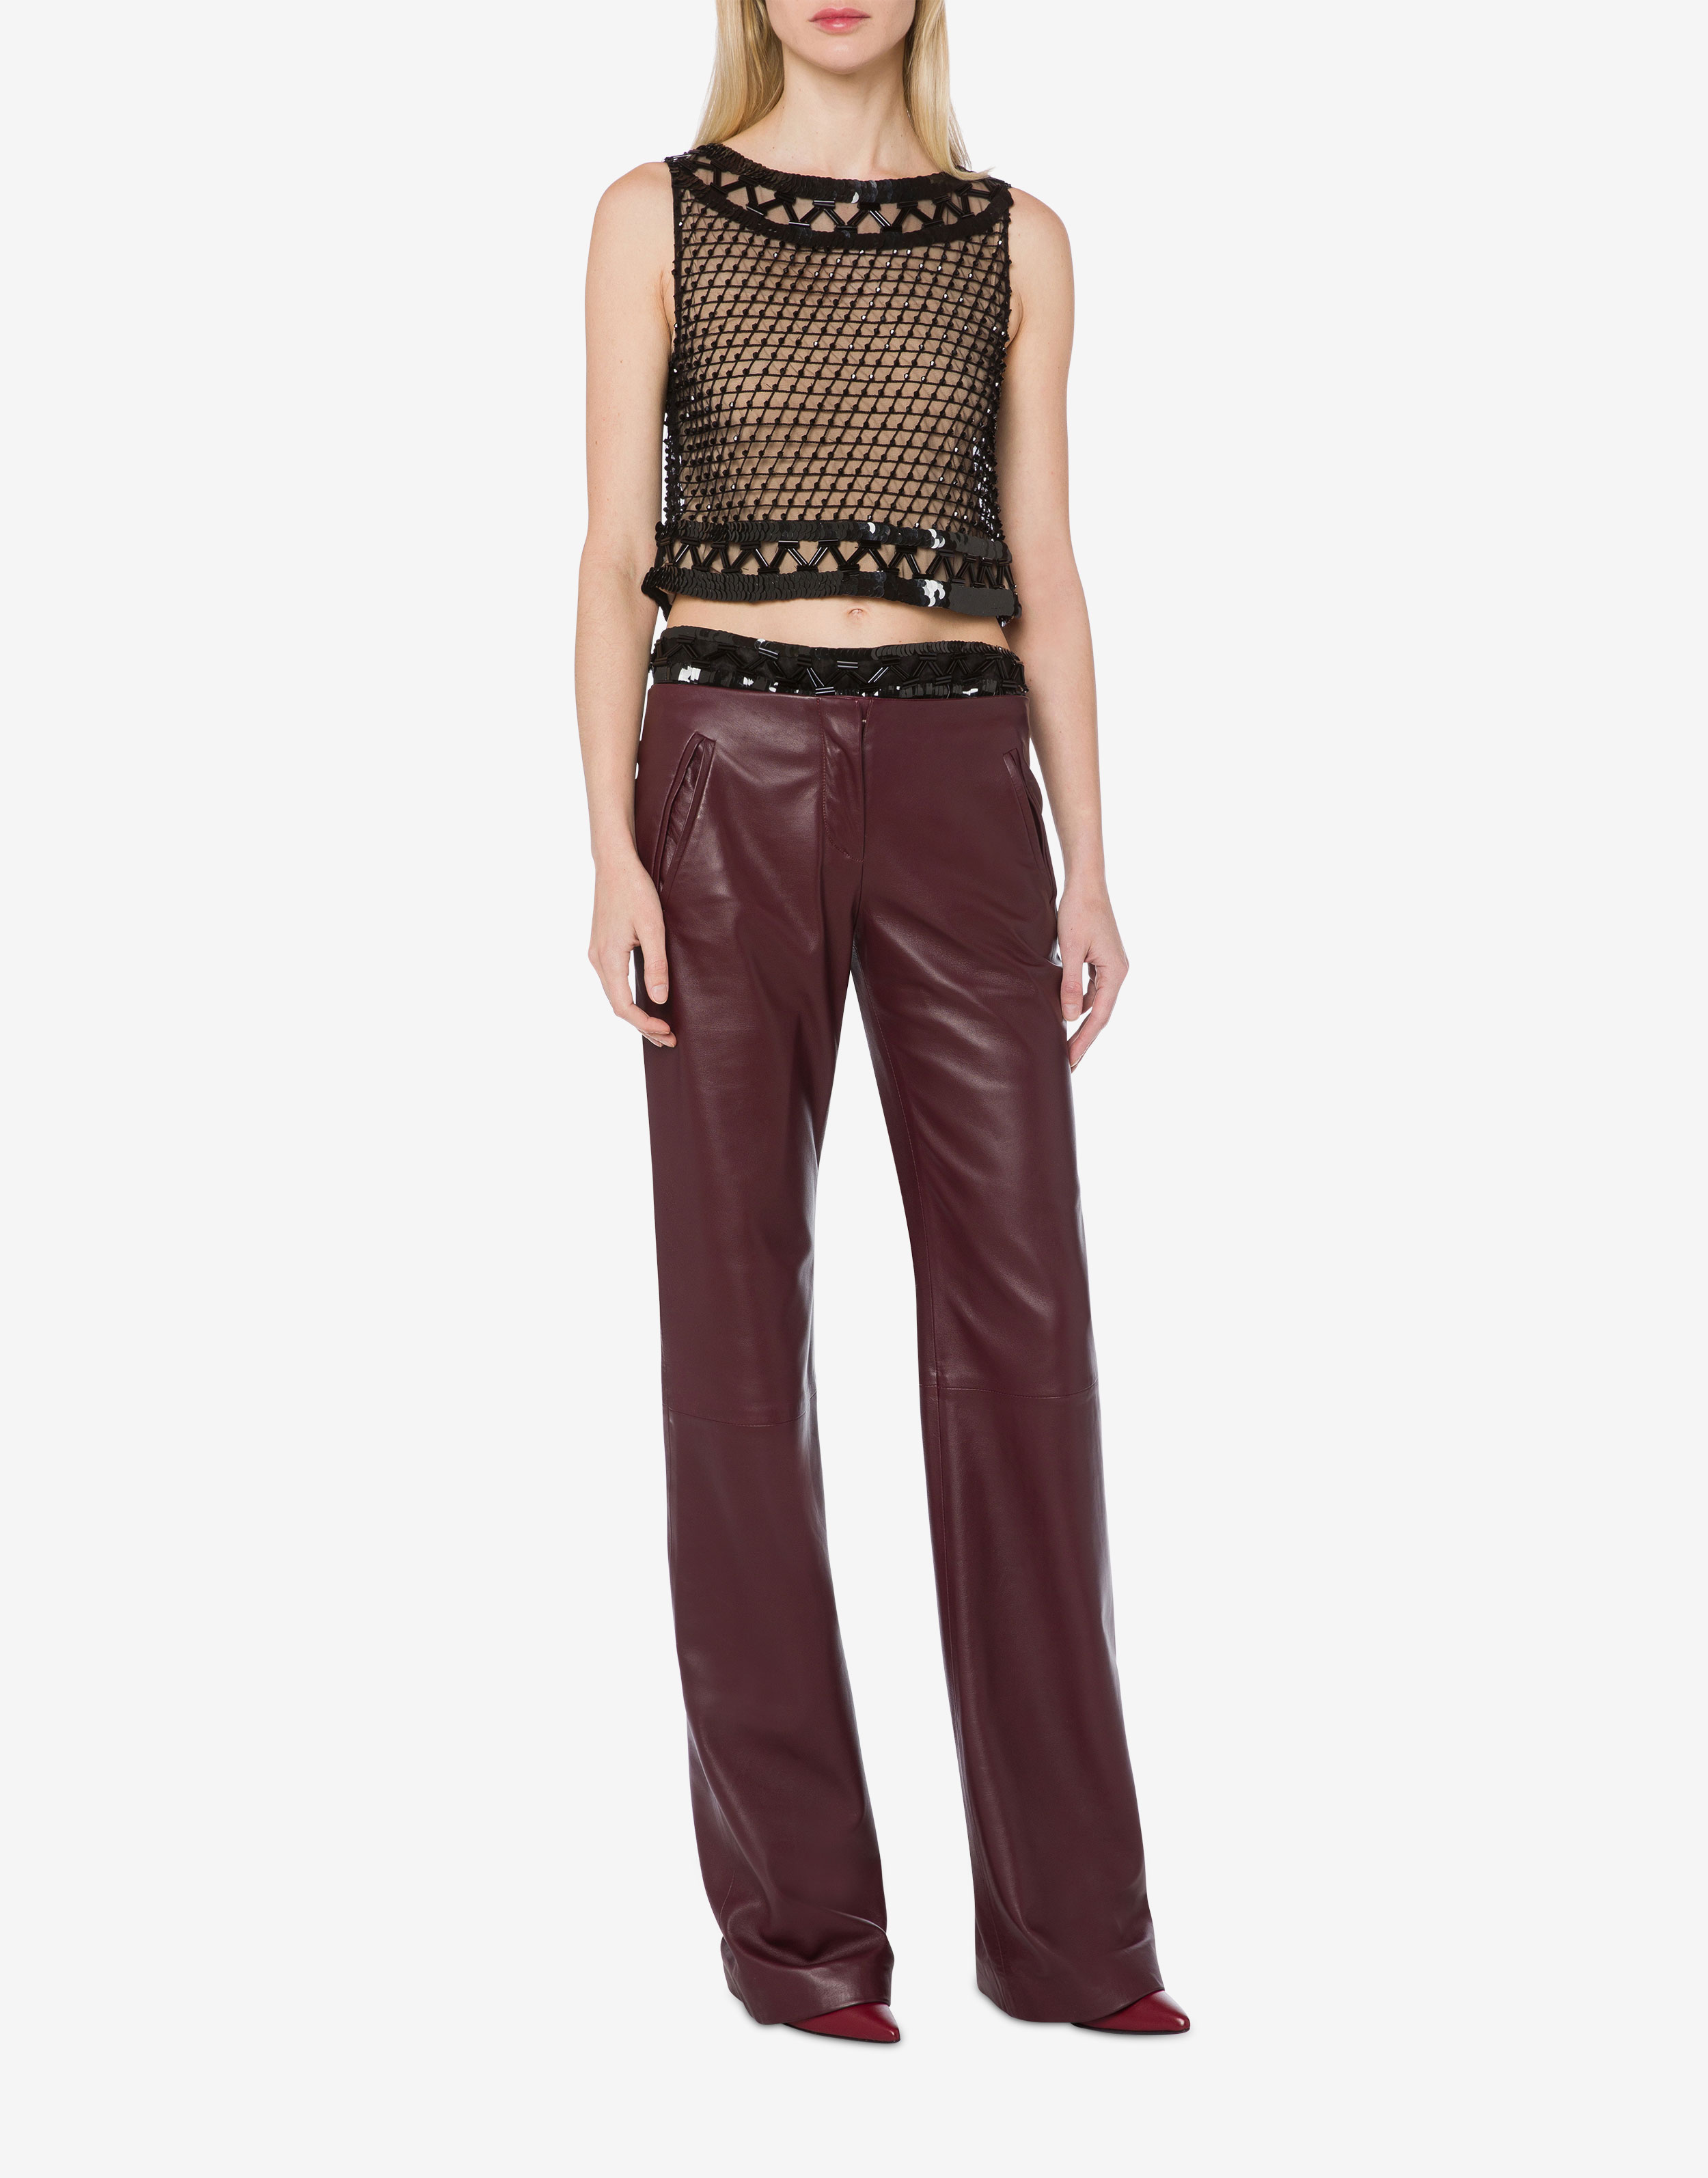 Nappa leather flared trousers